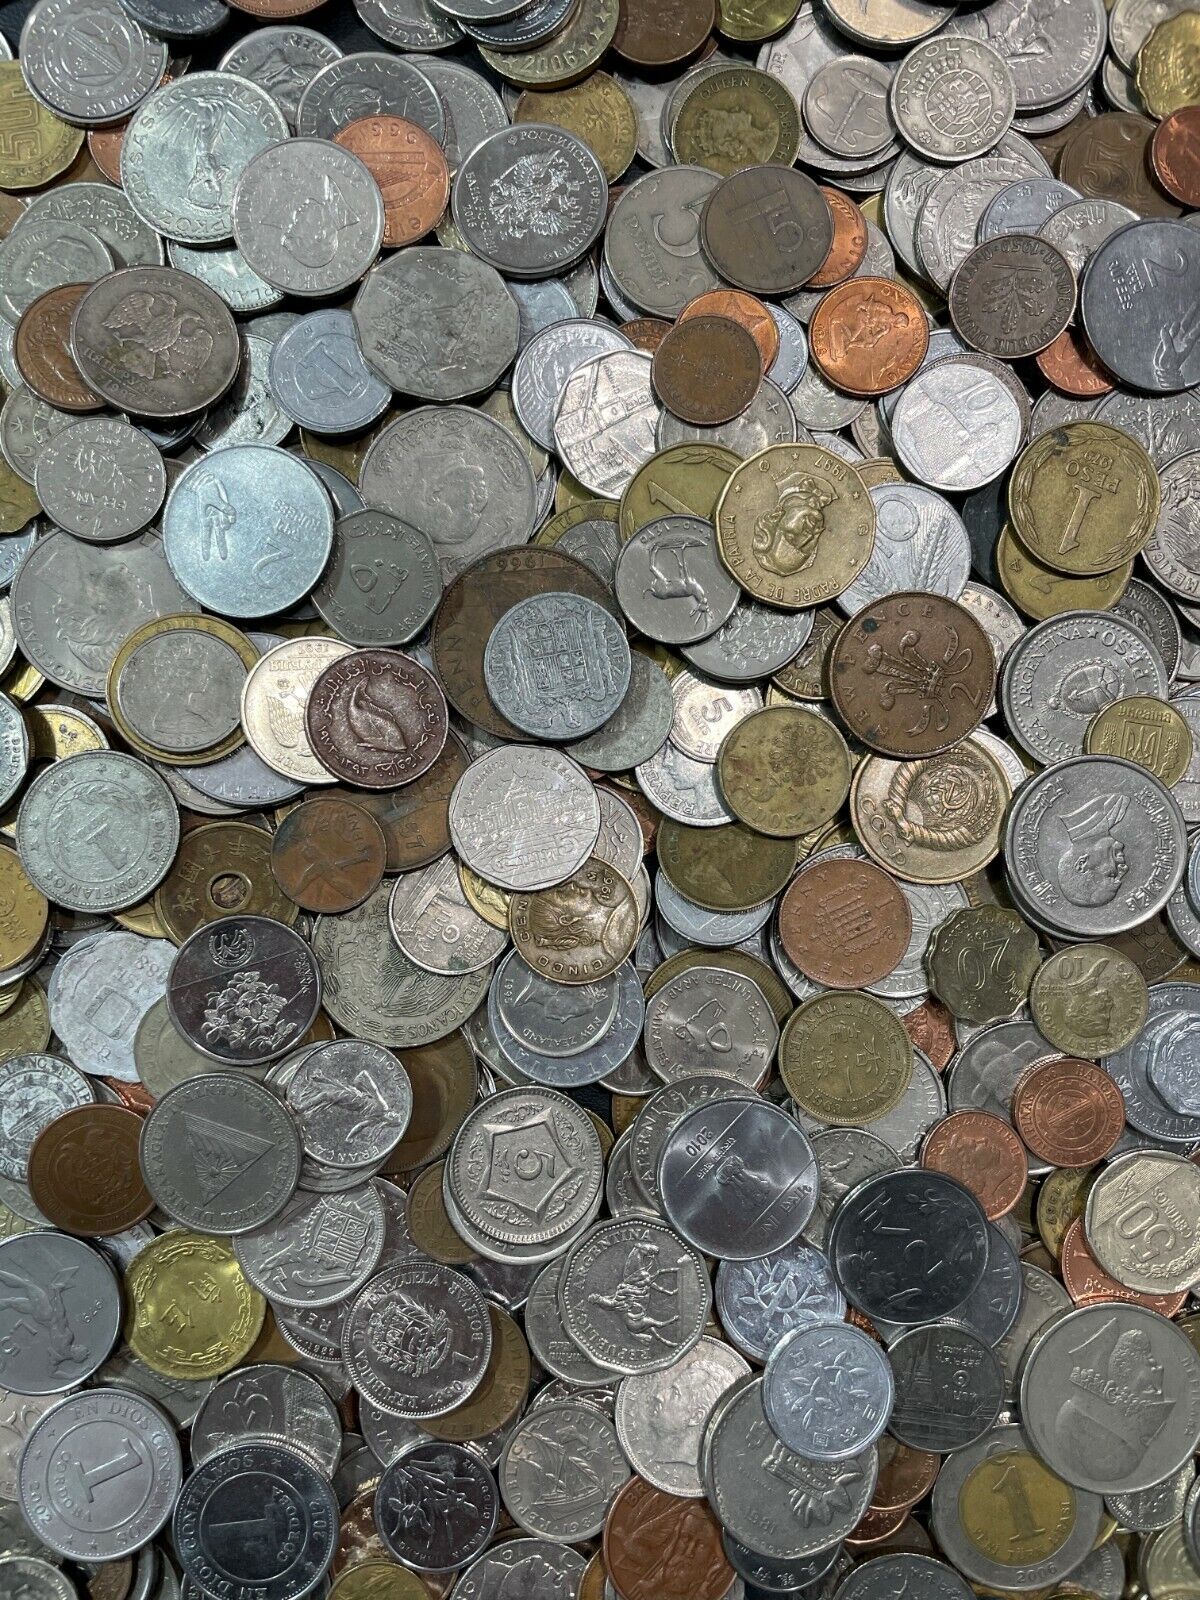 Huge Bulk Mixed Lot of 100 Assorted Foreign Coins From Around the World